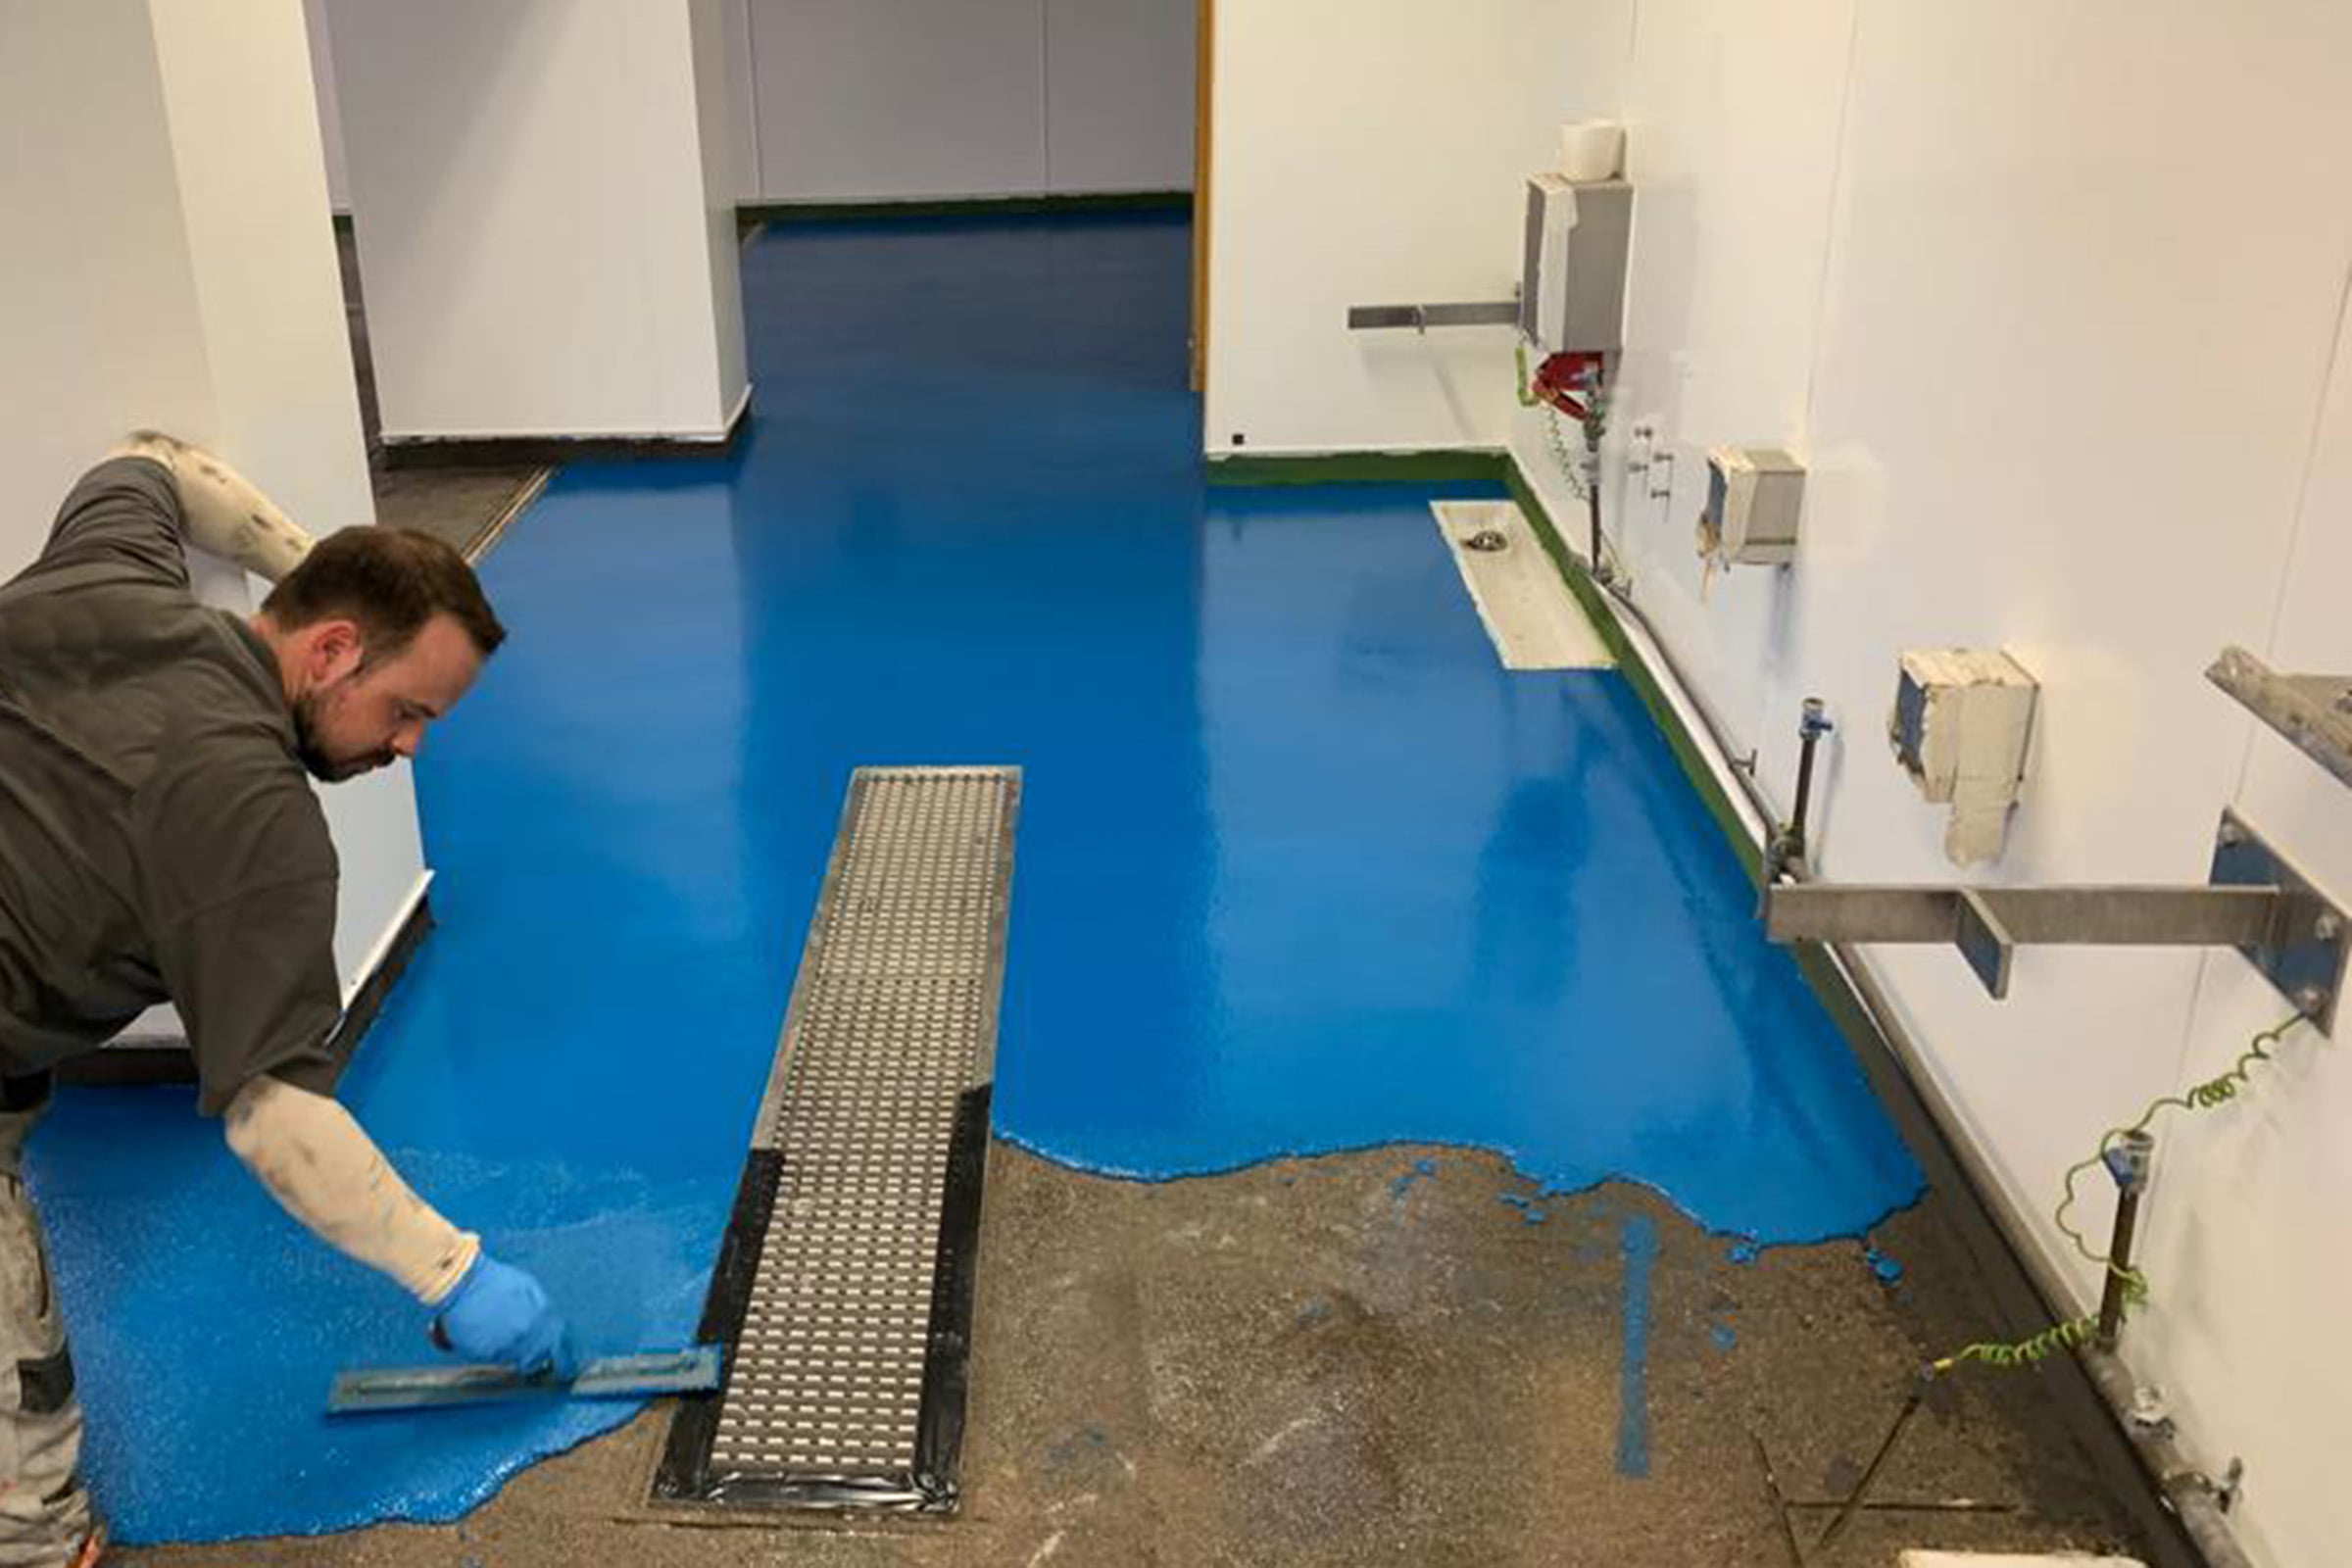 Polyurethane resin flooring being installed in a laboratory